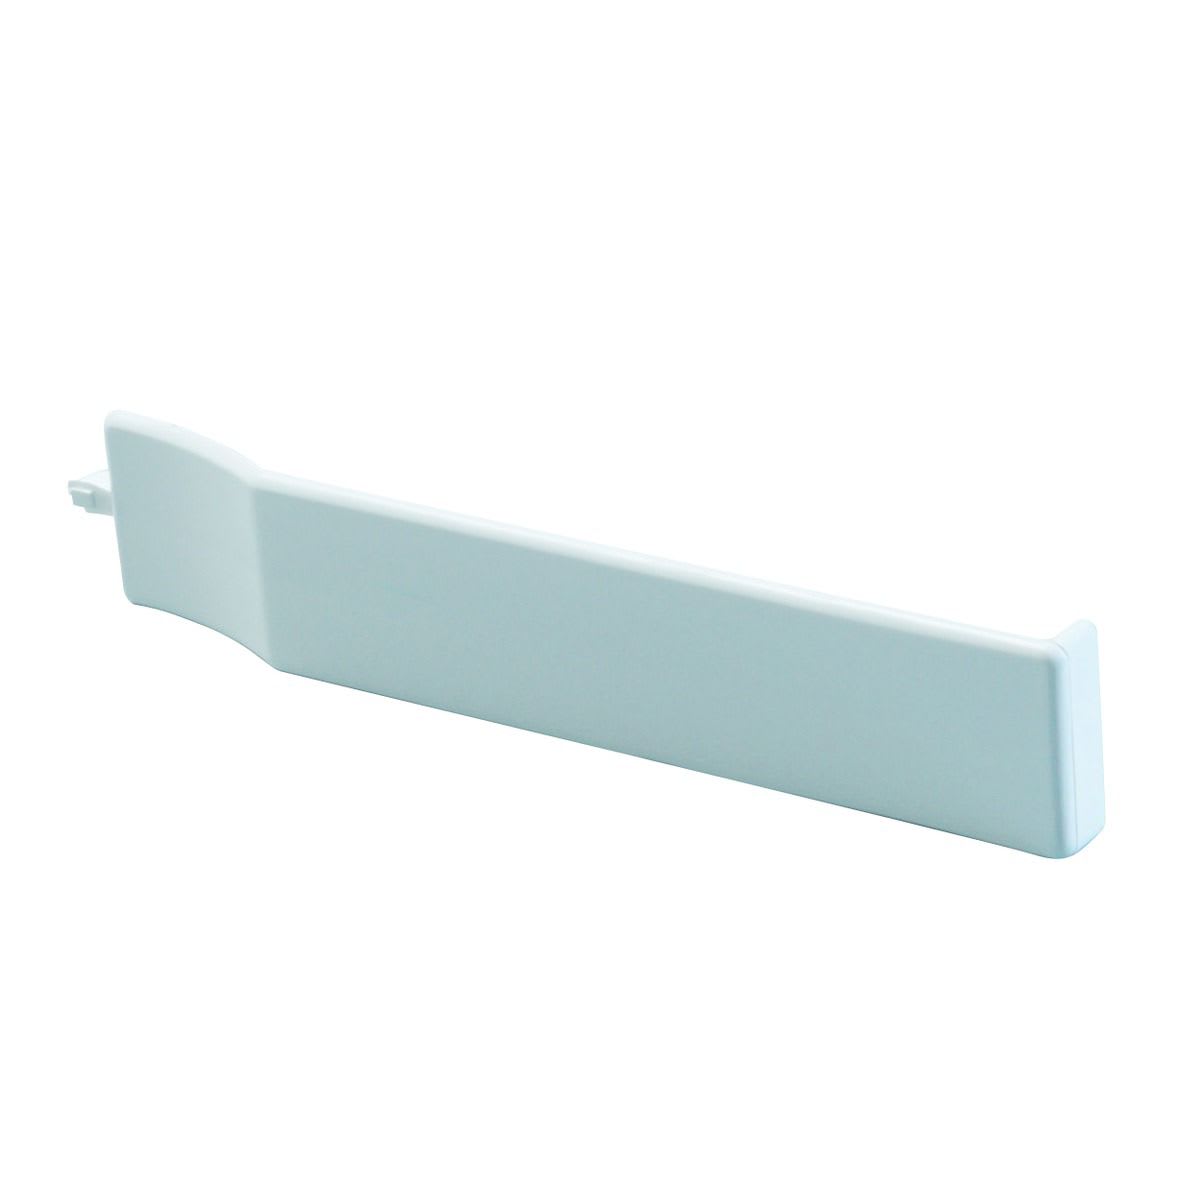 Wickes PVCu White Cladding Butt Joint Trim -